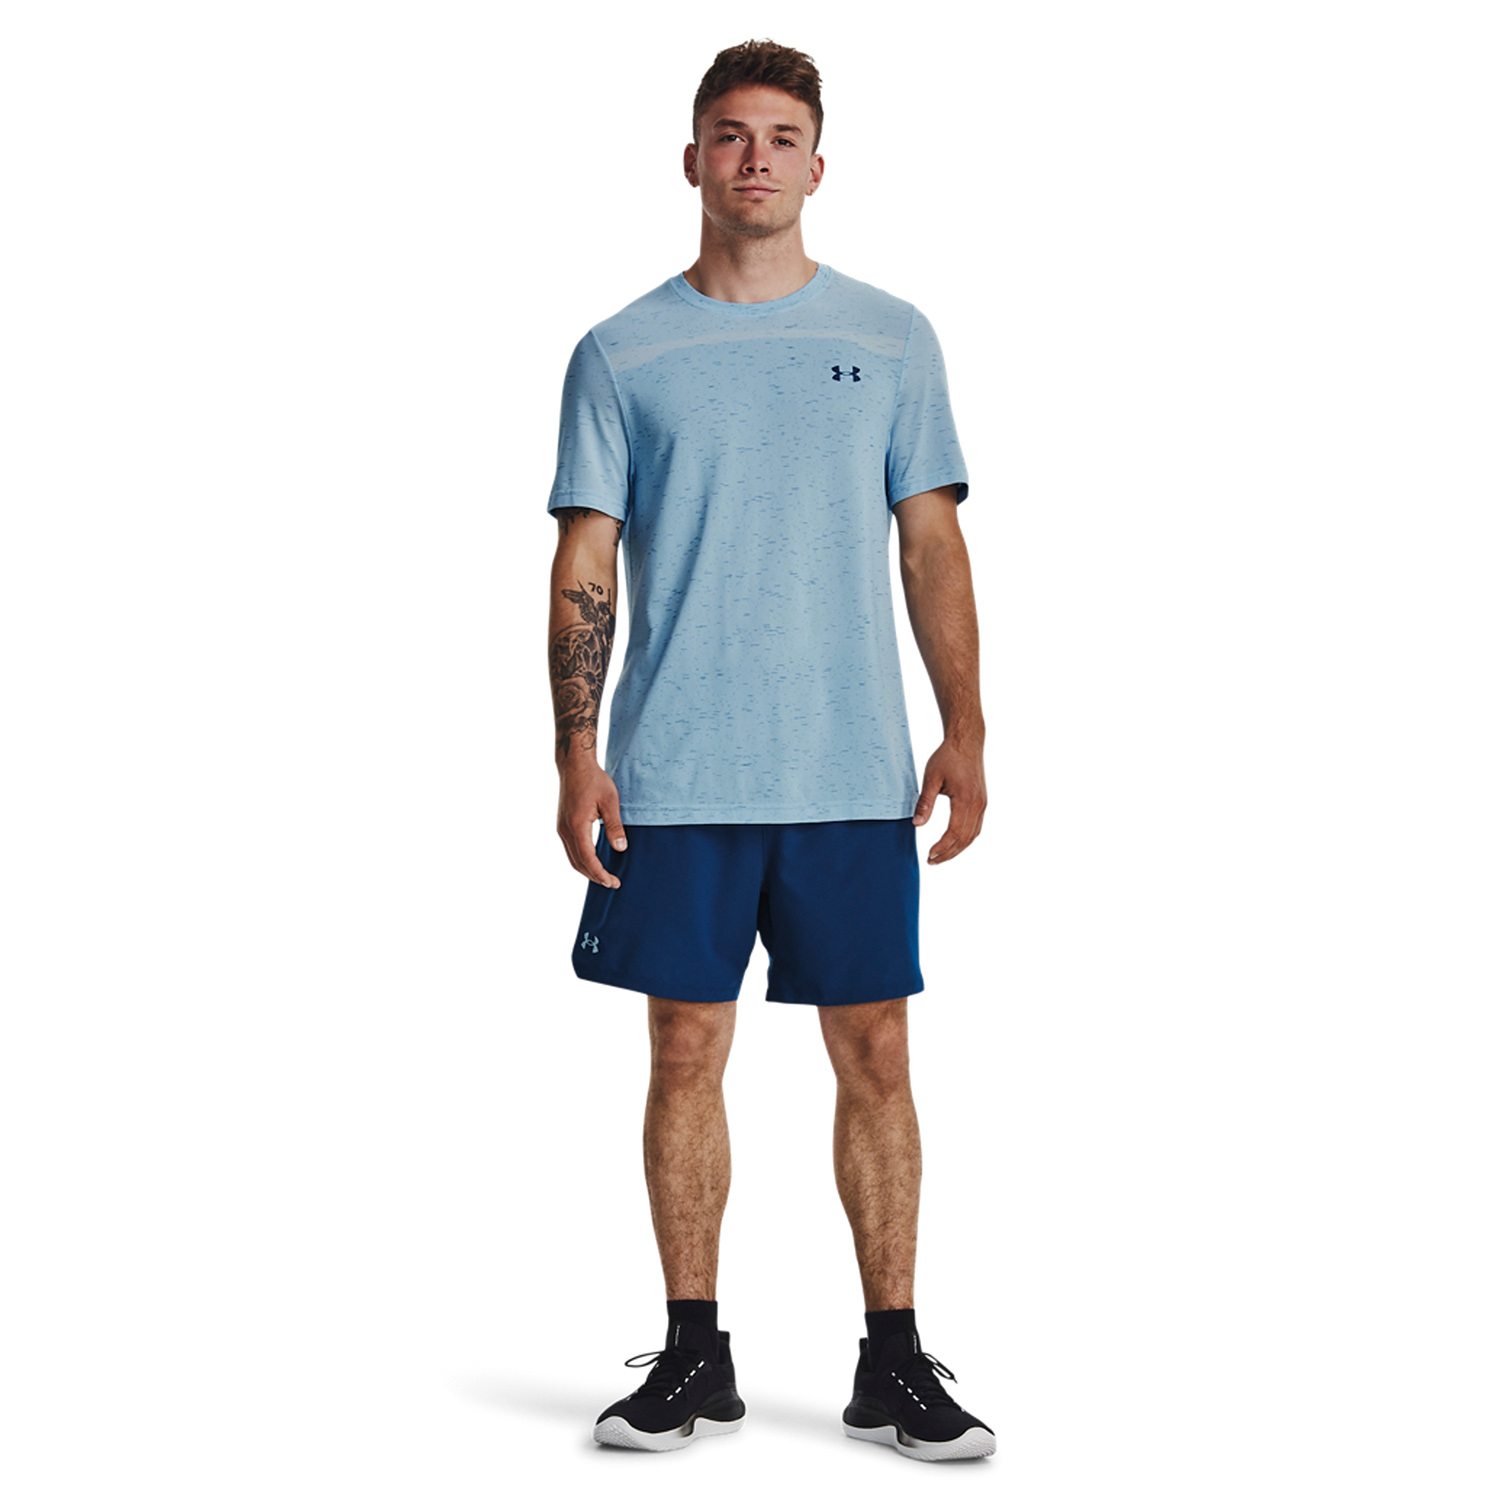 Under Armour Vanish Woven Graphic 6in Shorts - Varsity Blue